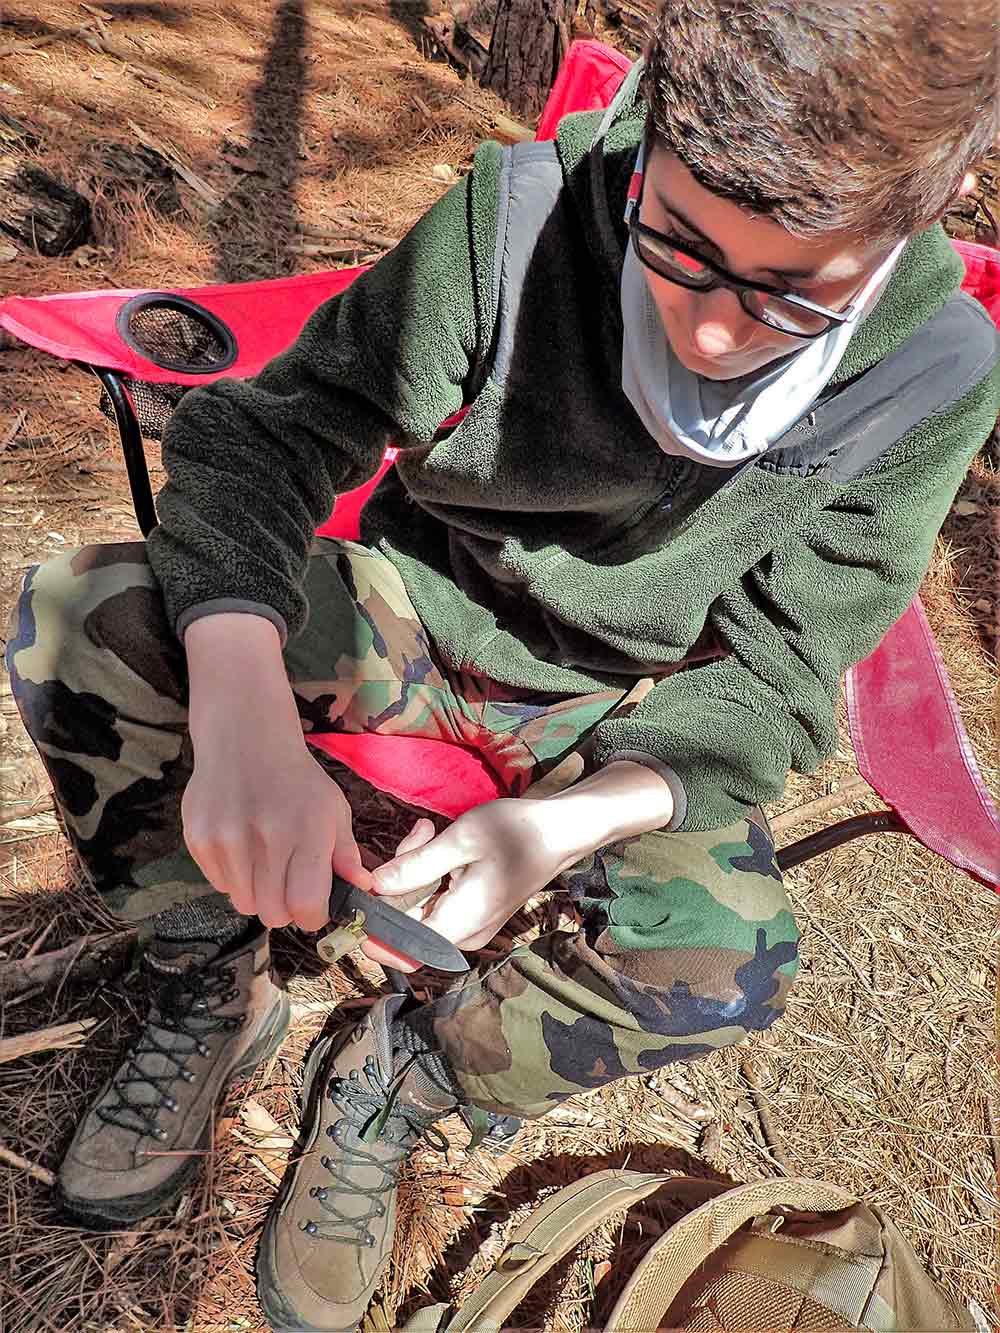 A student safely uses his knife